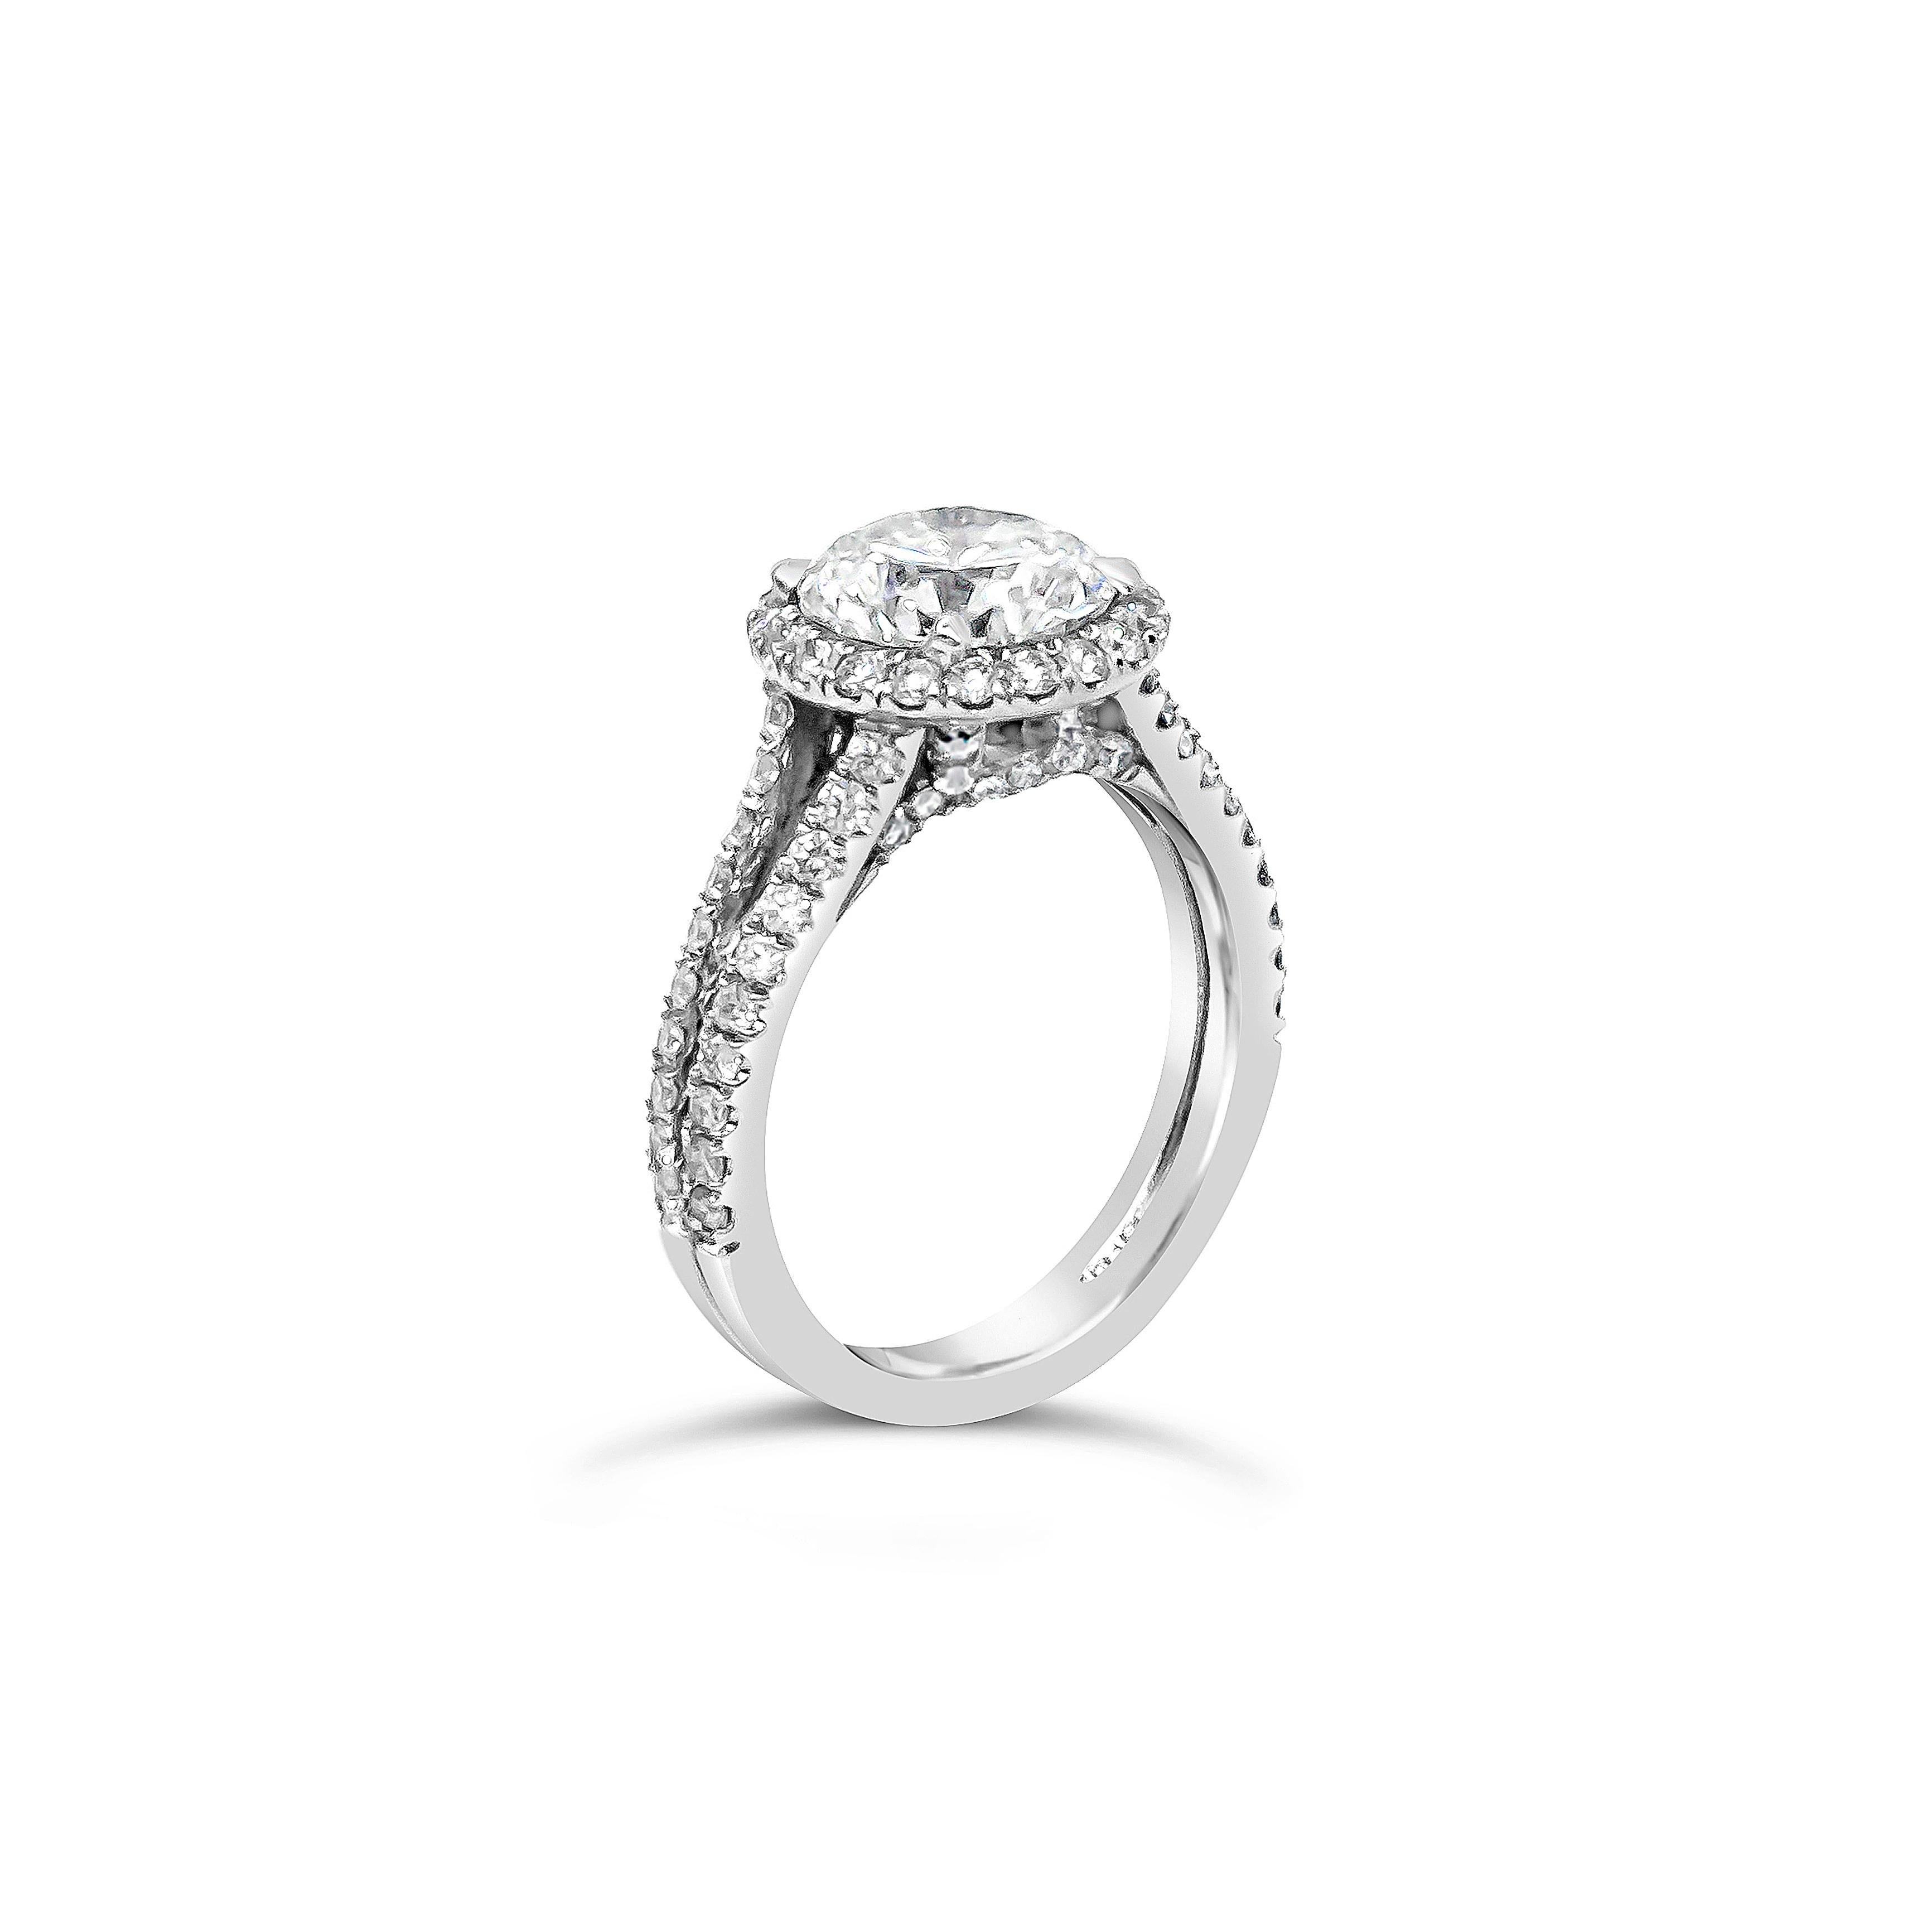 Features a center stone of 2.24 carats round brilliant diamond, GIA certified as F color and I1 in clarity. Set in a halo of diamonds and a split shank half eternity setting thats is accented with diamonds. Accent diamonds weigh 0.85 carats total.